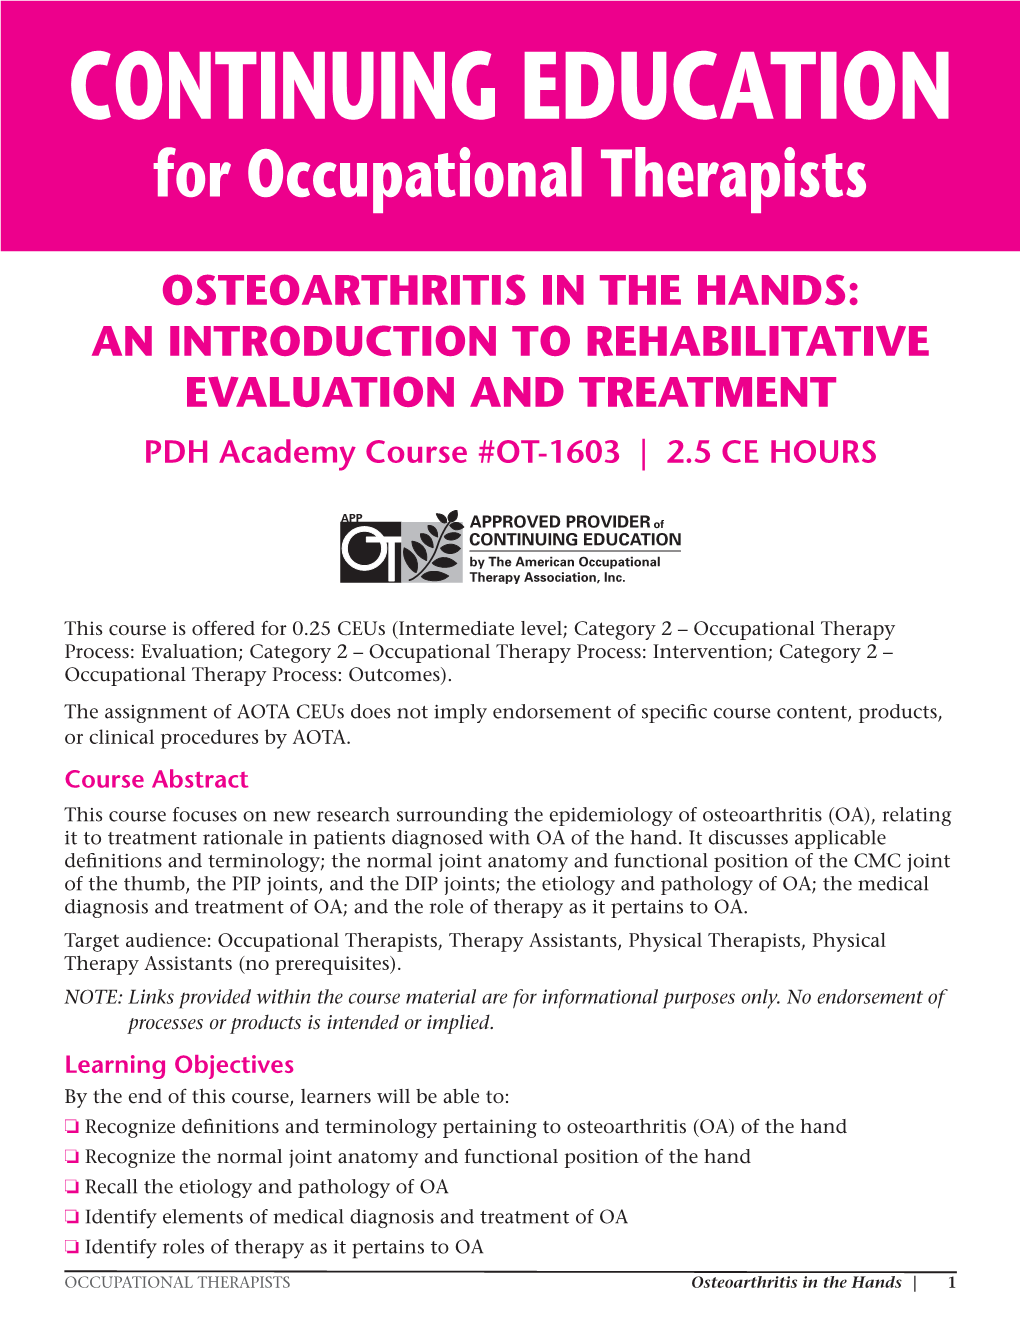 For Occupational Therapists